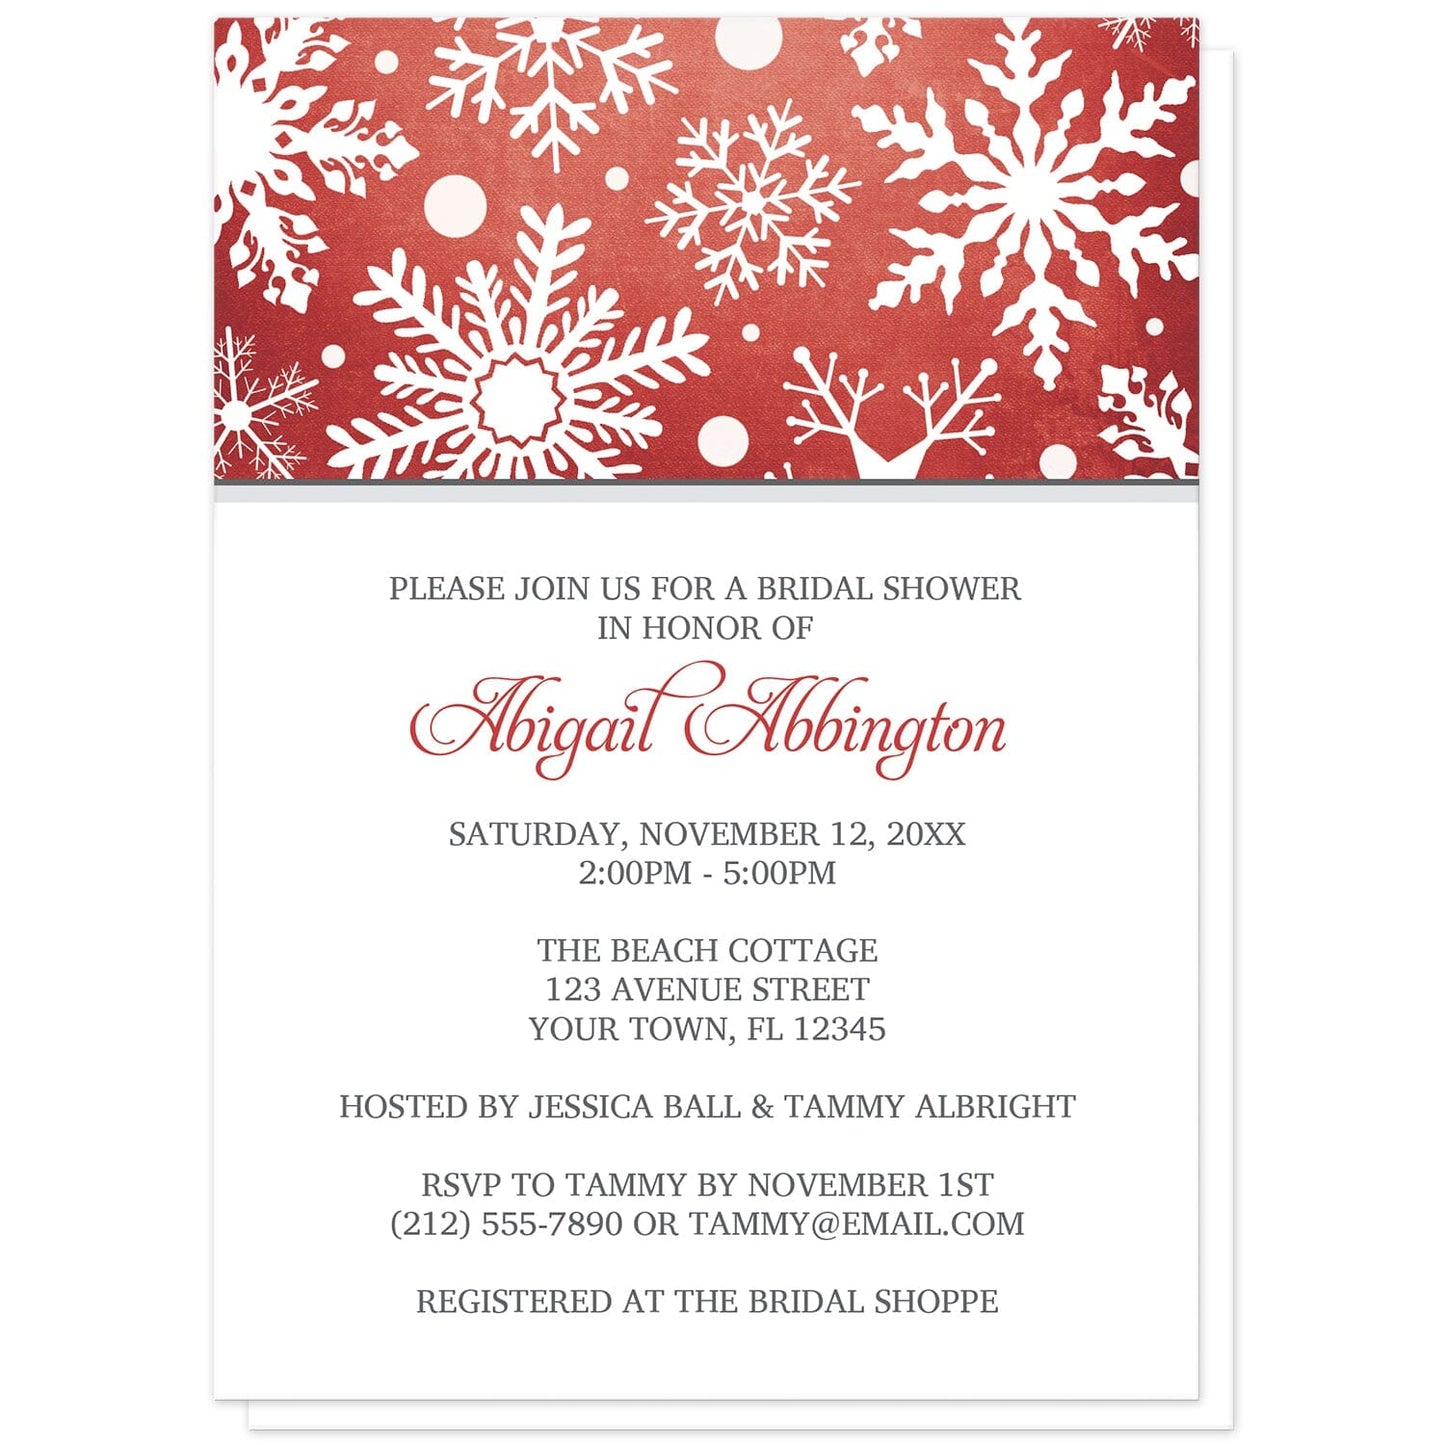 Winter Snowflake Red Gray Bridal Shower Invitations at Artistically Invited. Modern winter snowflake red gray bridal shower invitations designed with a white snowflakes pattern over an organic red wintry background at the top of the invitations. Your personalized bridal shower celebration details are custom printed in red and gray on white below the snowflakes. 